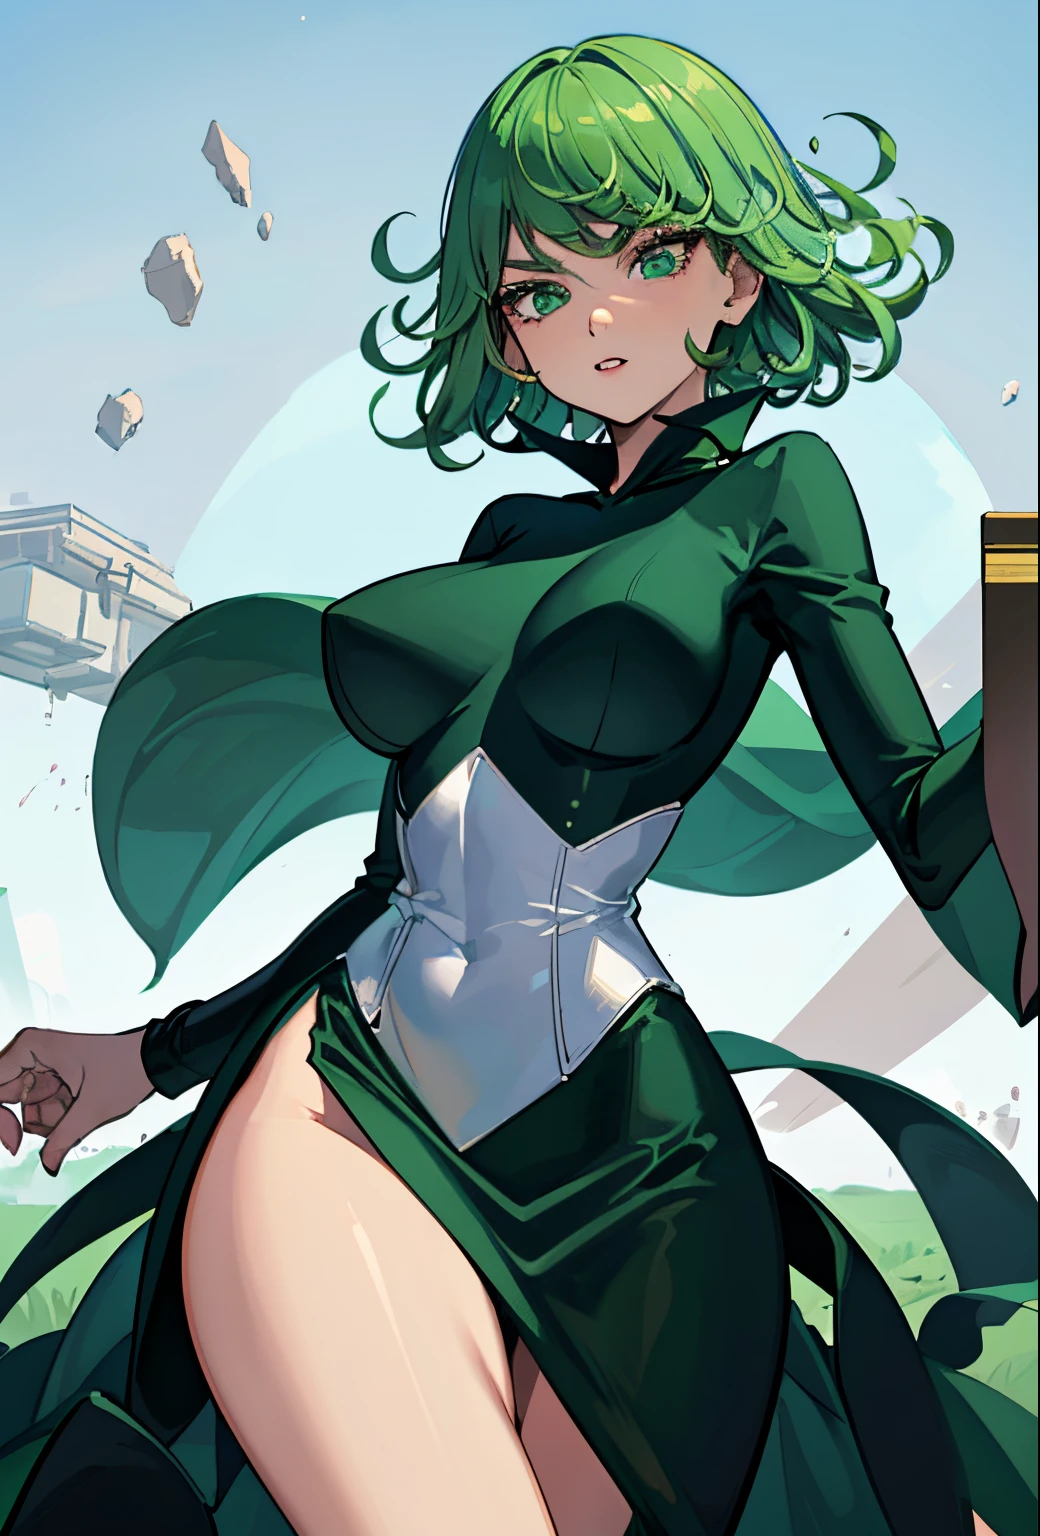 (beste-Qualit, 8K, 12), 1 girl, tatsumaki, Short Hair Hair, green hair, Huge-breasts, , the perfect body, ultra detail face, detailed lips, Slender Eyes, gown, stands, enticing, Excited, convex areolas, steam, From Bottom